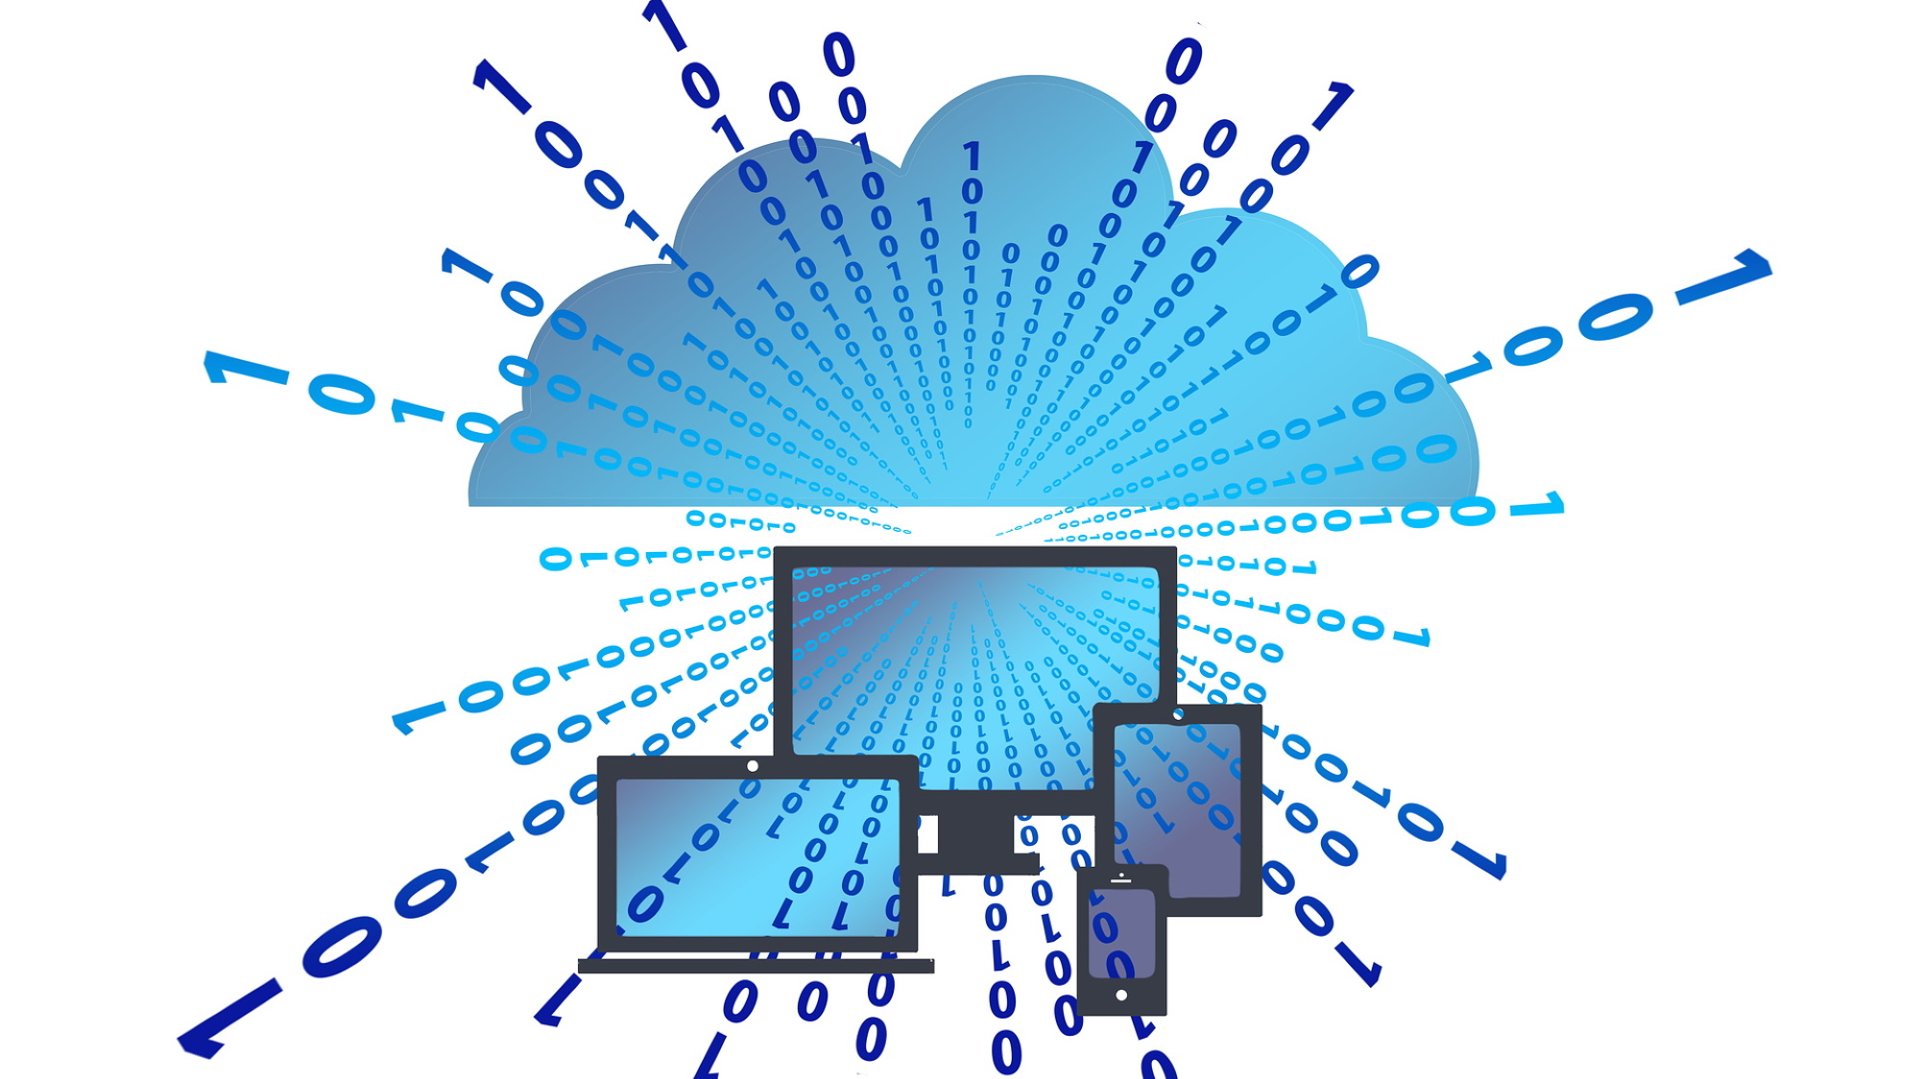 image representing the cloud and various computing devices